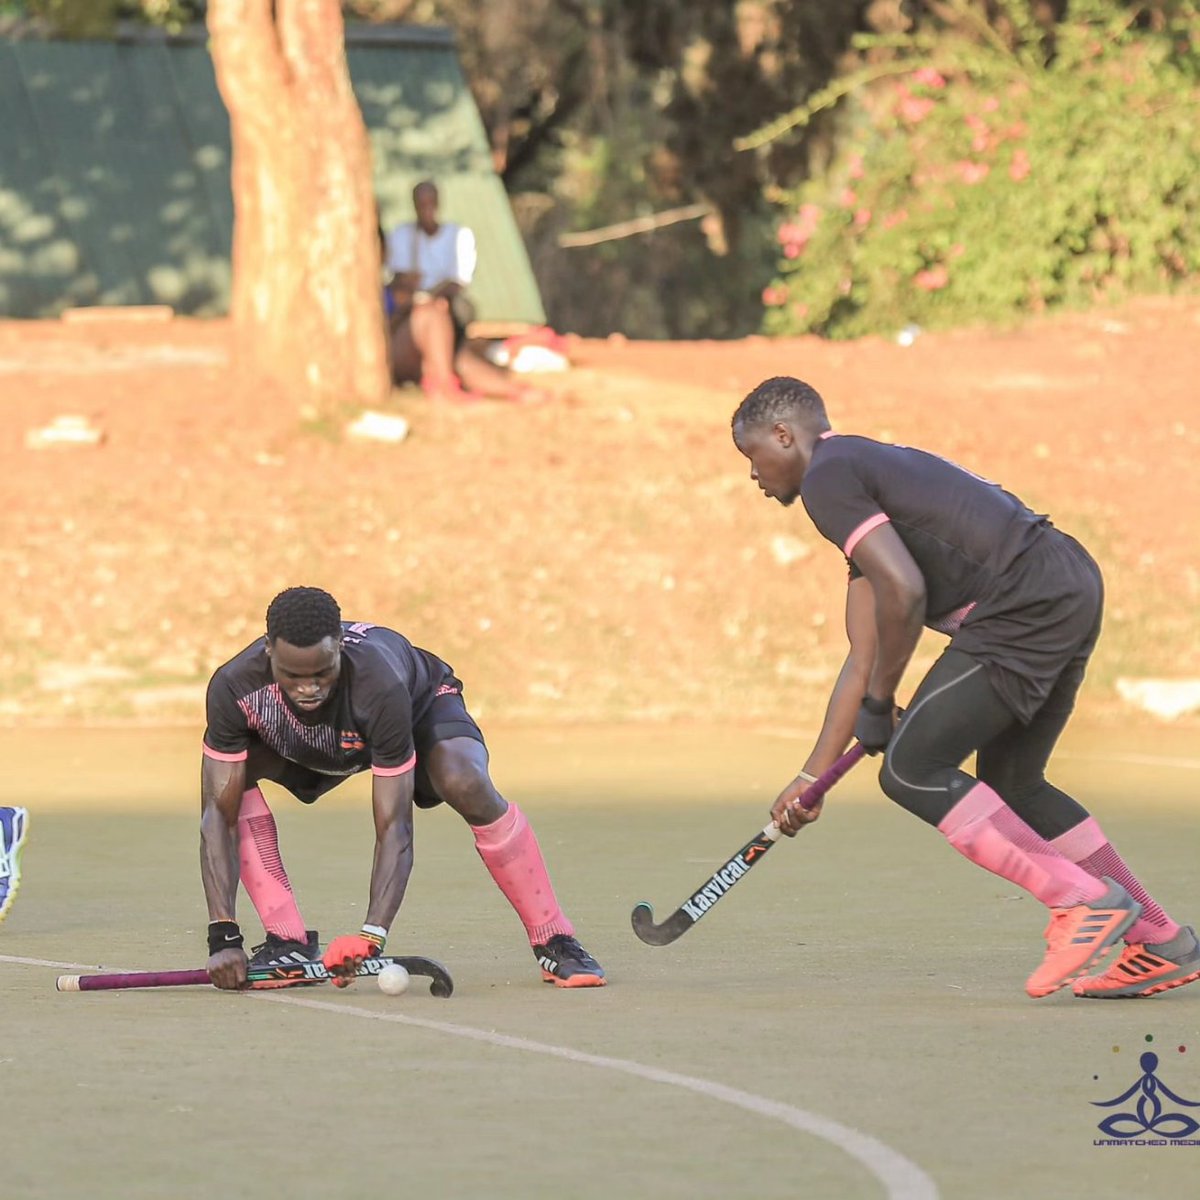 Drag flick King @BatusaColline and stopper @maxwell_Traf14 enjoy the @kasvicar moments.These two have remained a night mare to most clubs in Lugogo